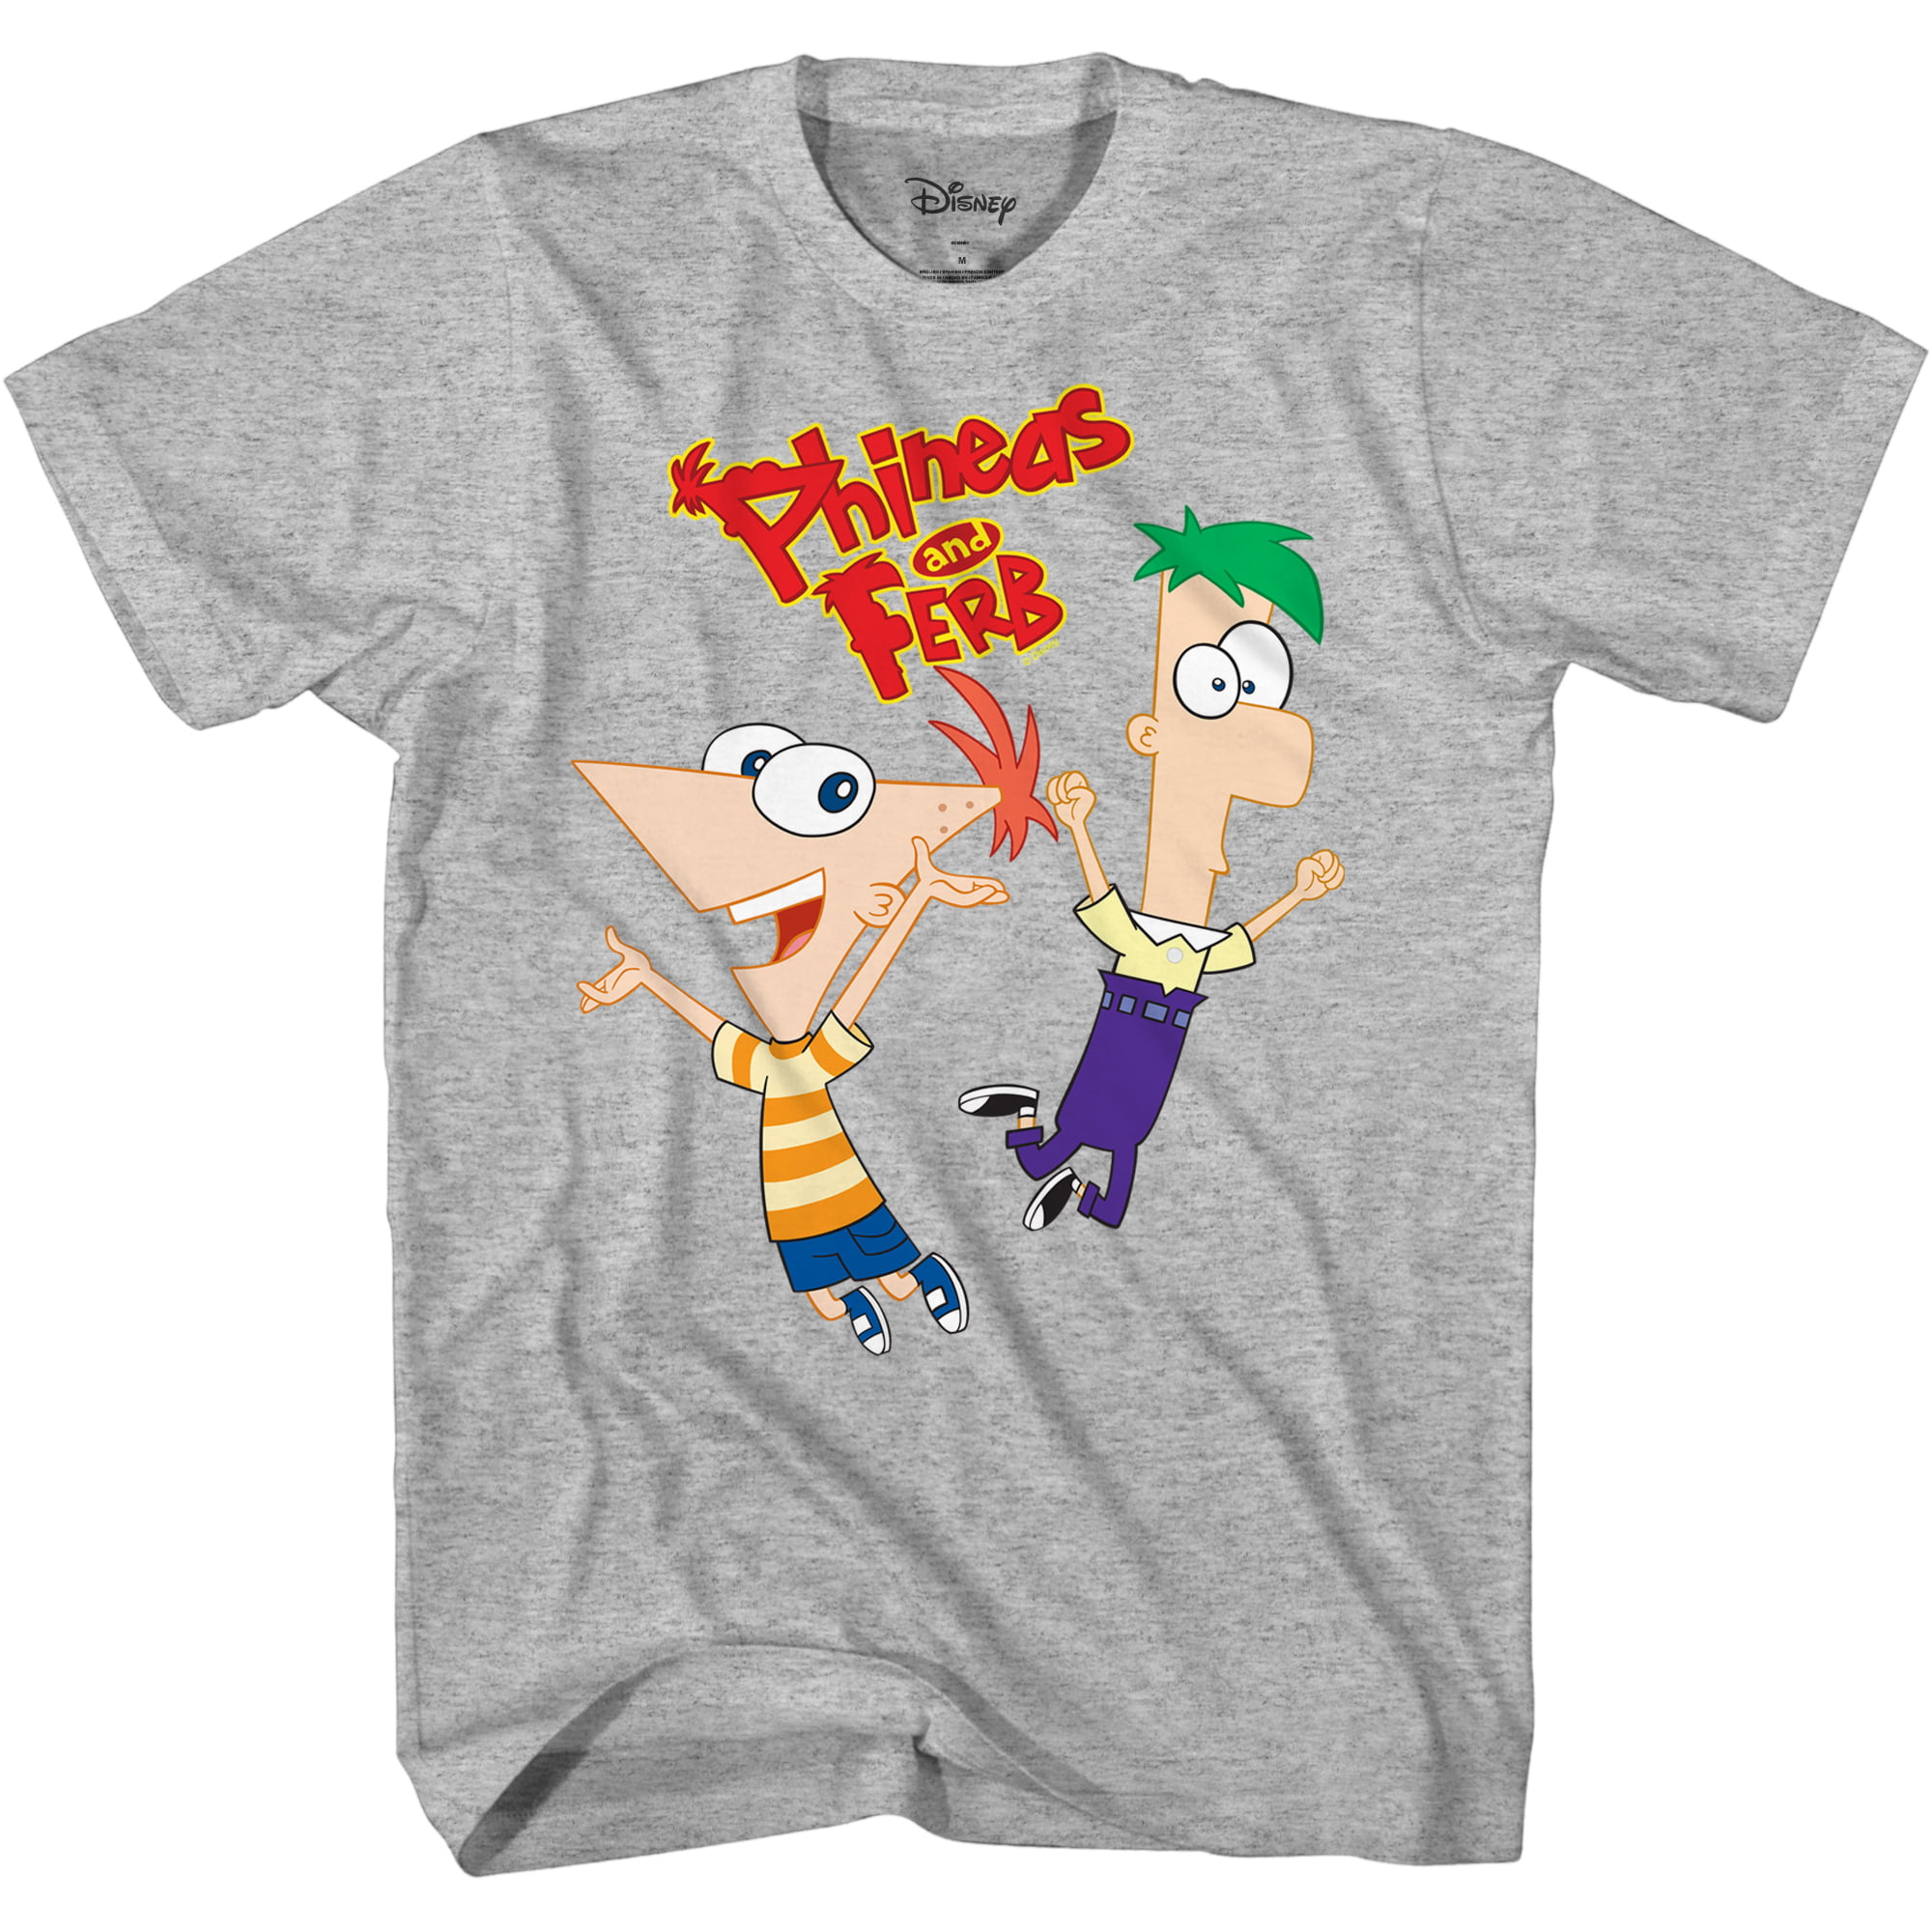 Disney Phineas And Ferb Boys Of Tie Dye T-Shirt